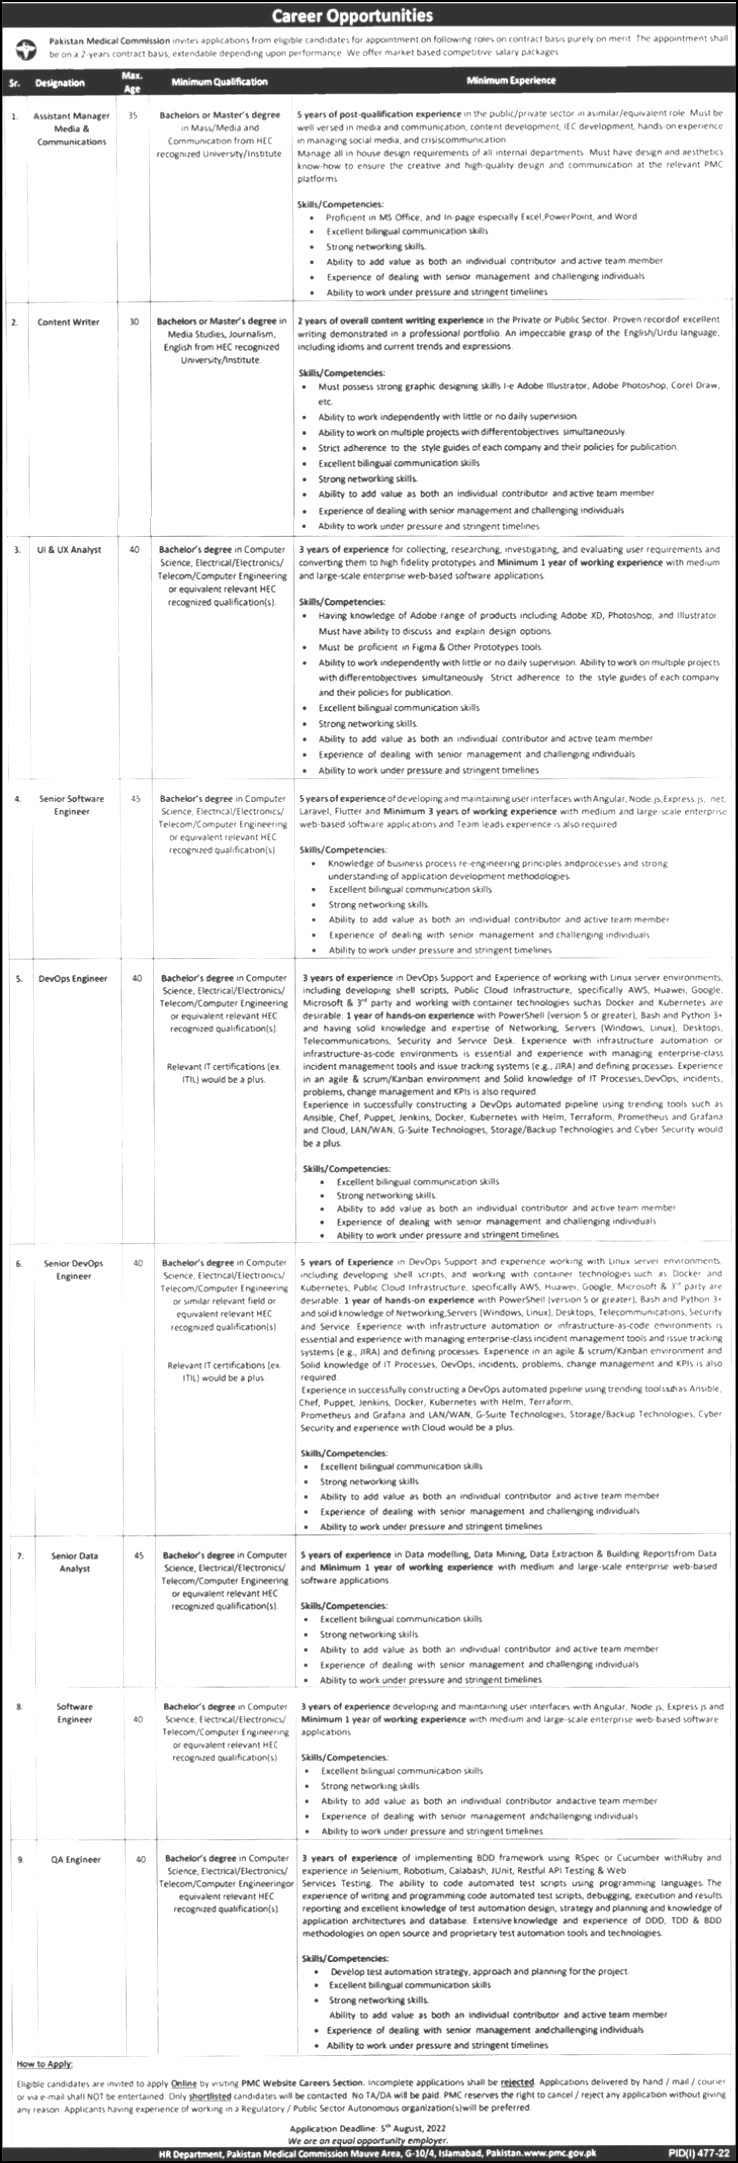 Software Engineer and Manager Jobs 2022